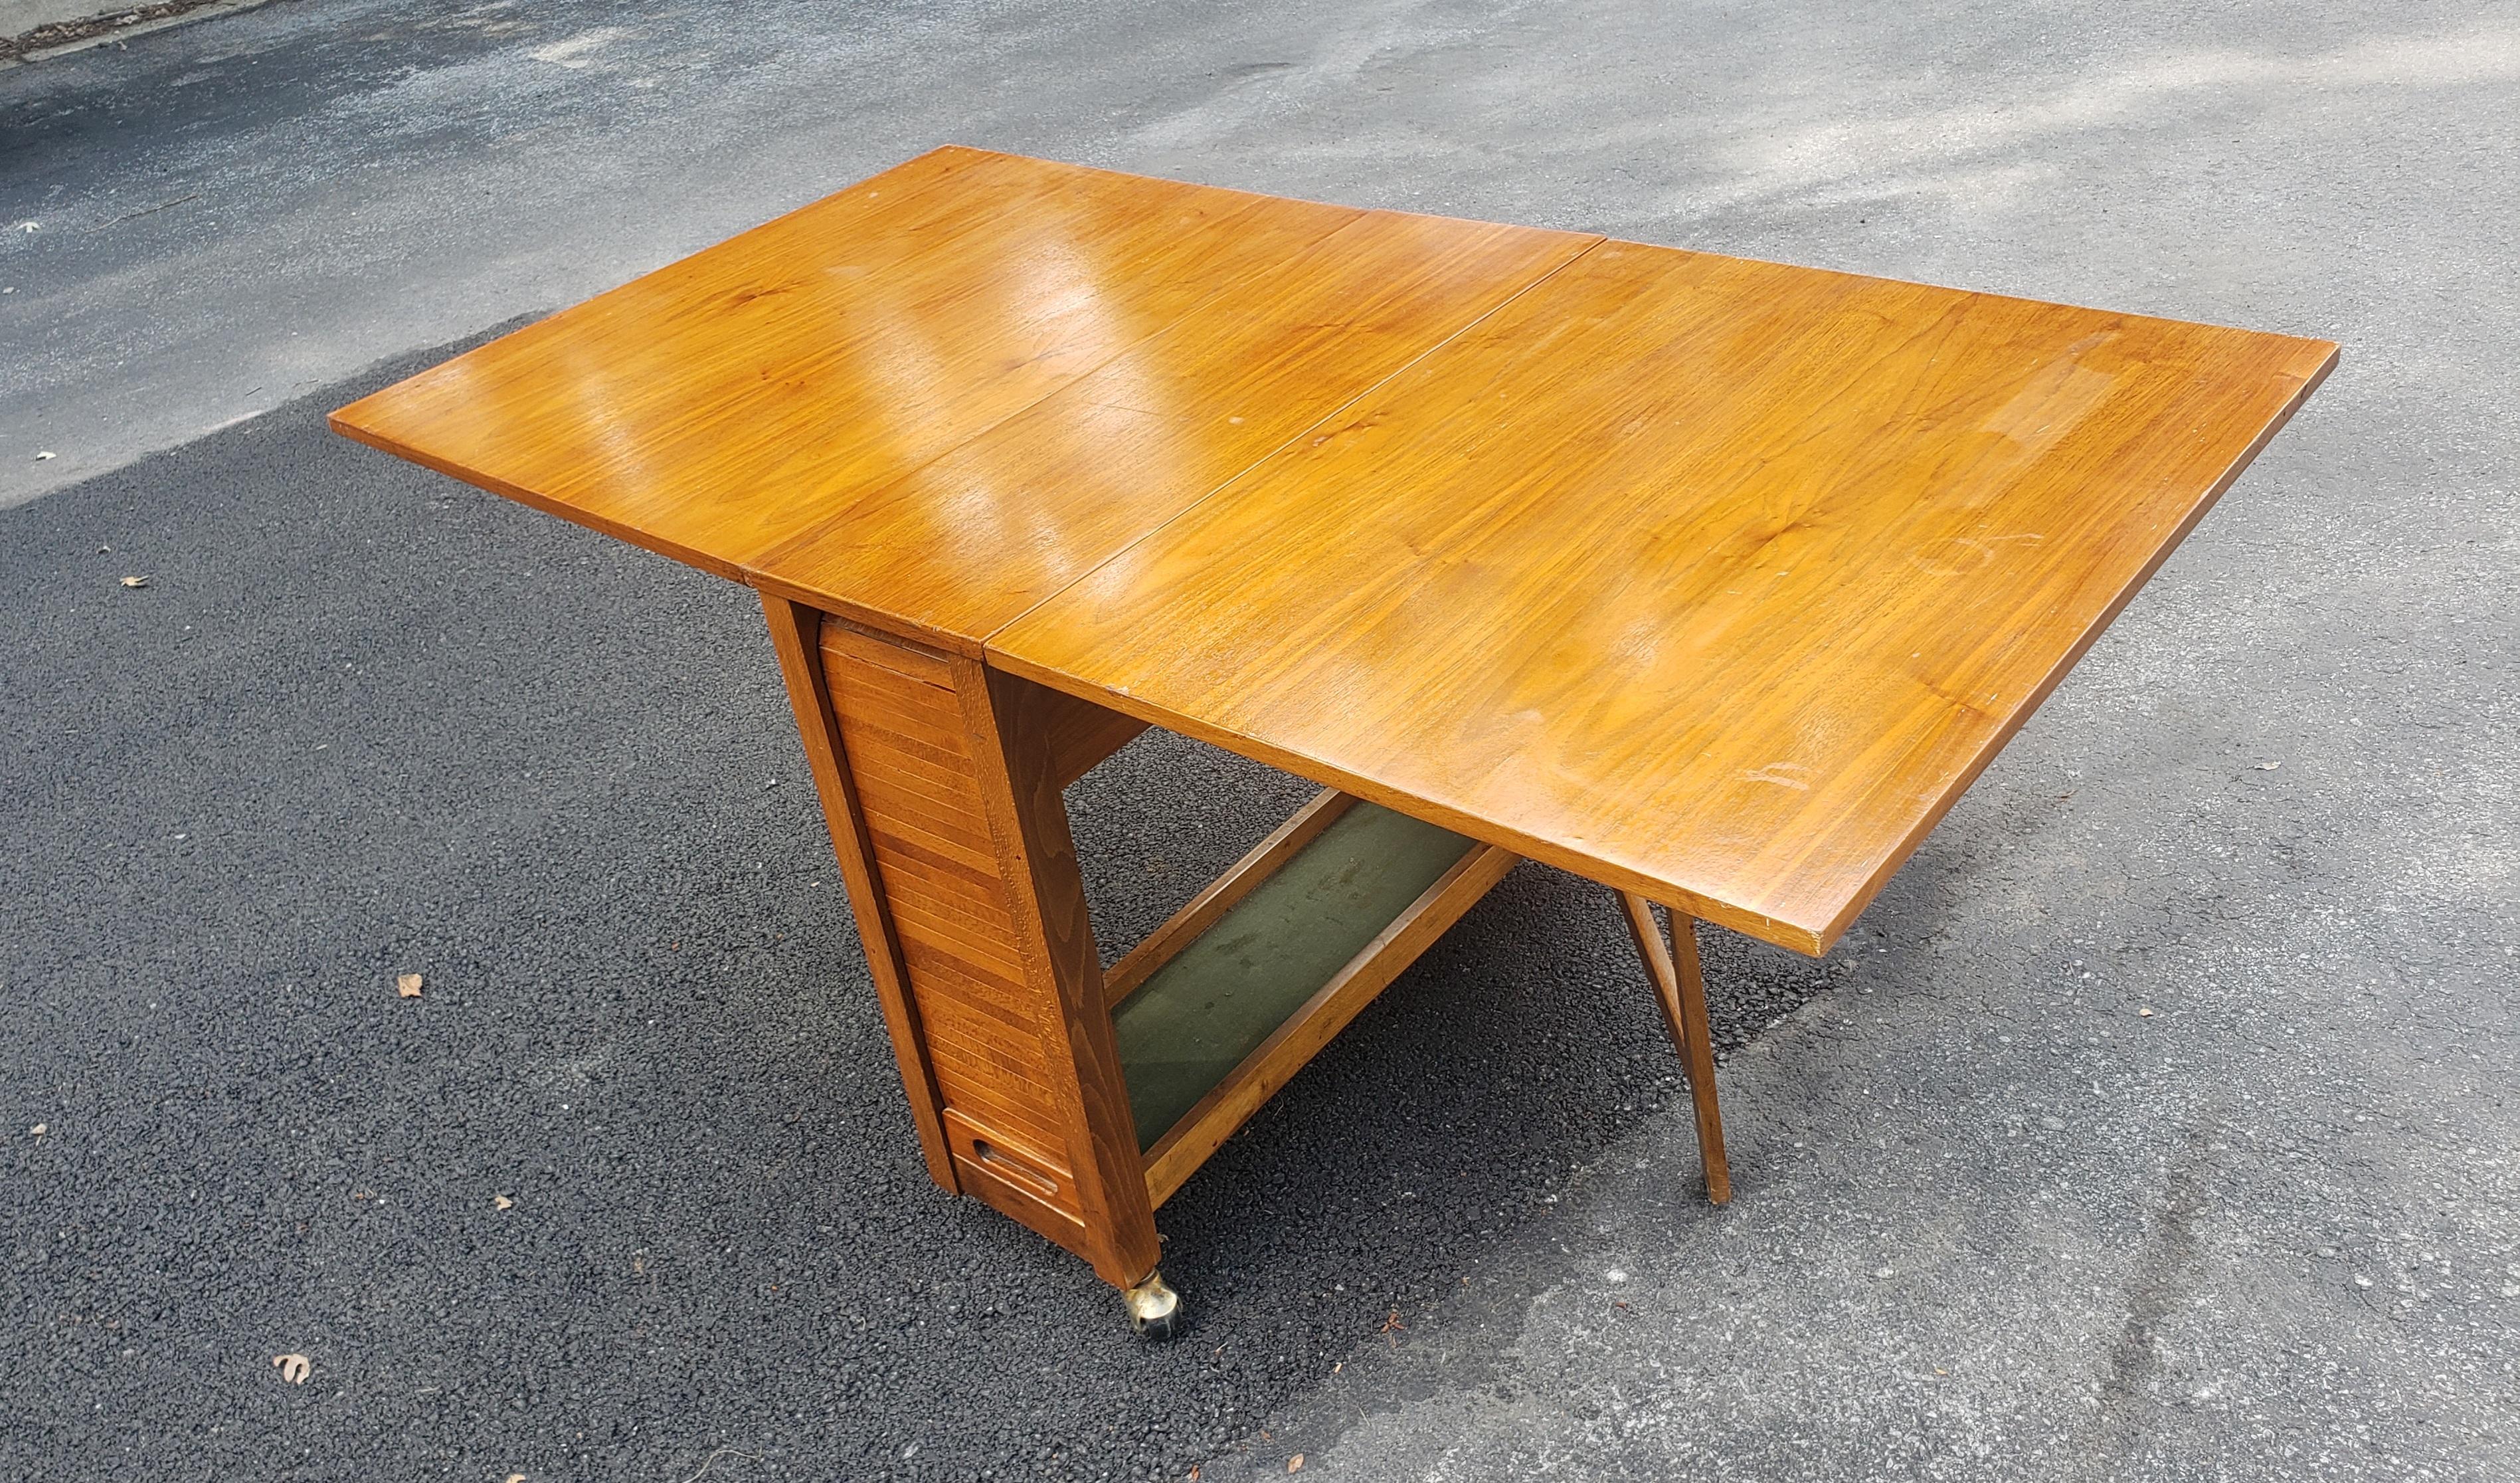 Stained Mid-Century Danish Modern Teak Drop-Leaf Dining Table with Storage on Rollers For Sale